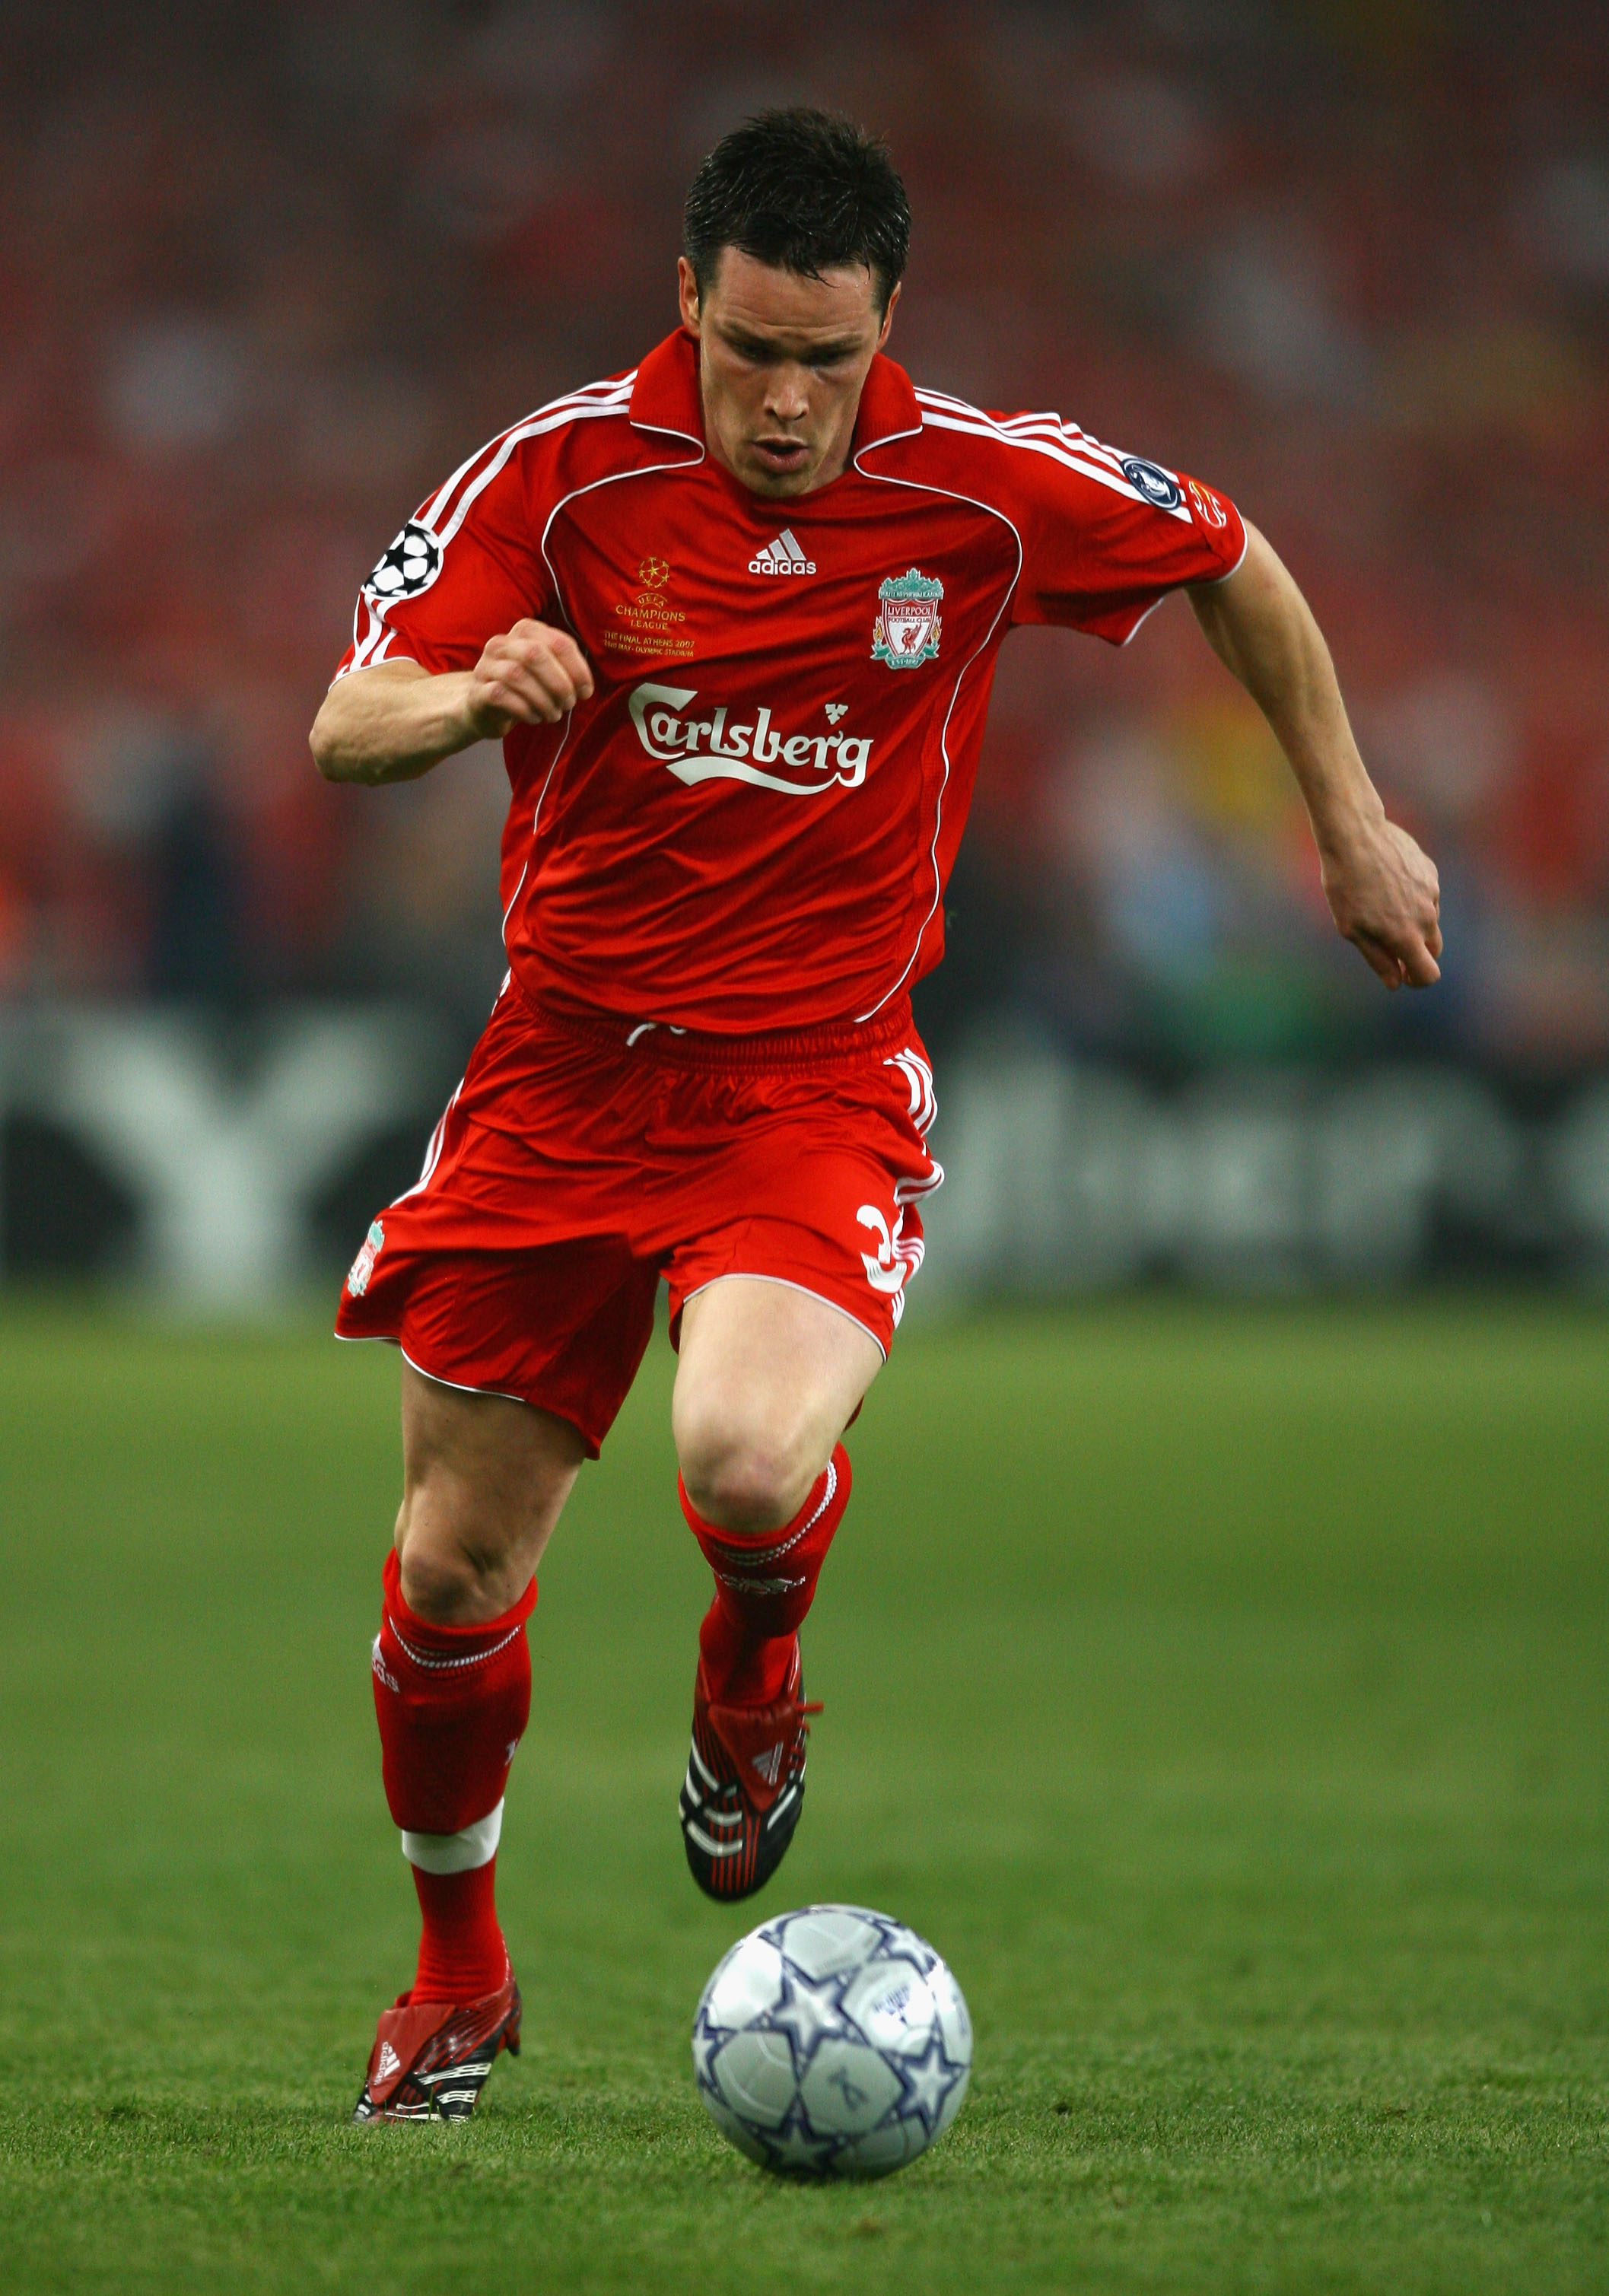 ATHENS, GREECE - MAY 23:  Steve Finnan of Liverpool runs with the ball during the UEFA Champions League Final match between Liverpool and AC Milan at the Olympic Stadium on May 23, 2007 in Athens, Greece.  (Photo by Shaun Botterill/Getty Images)